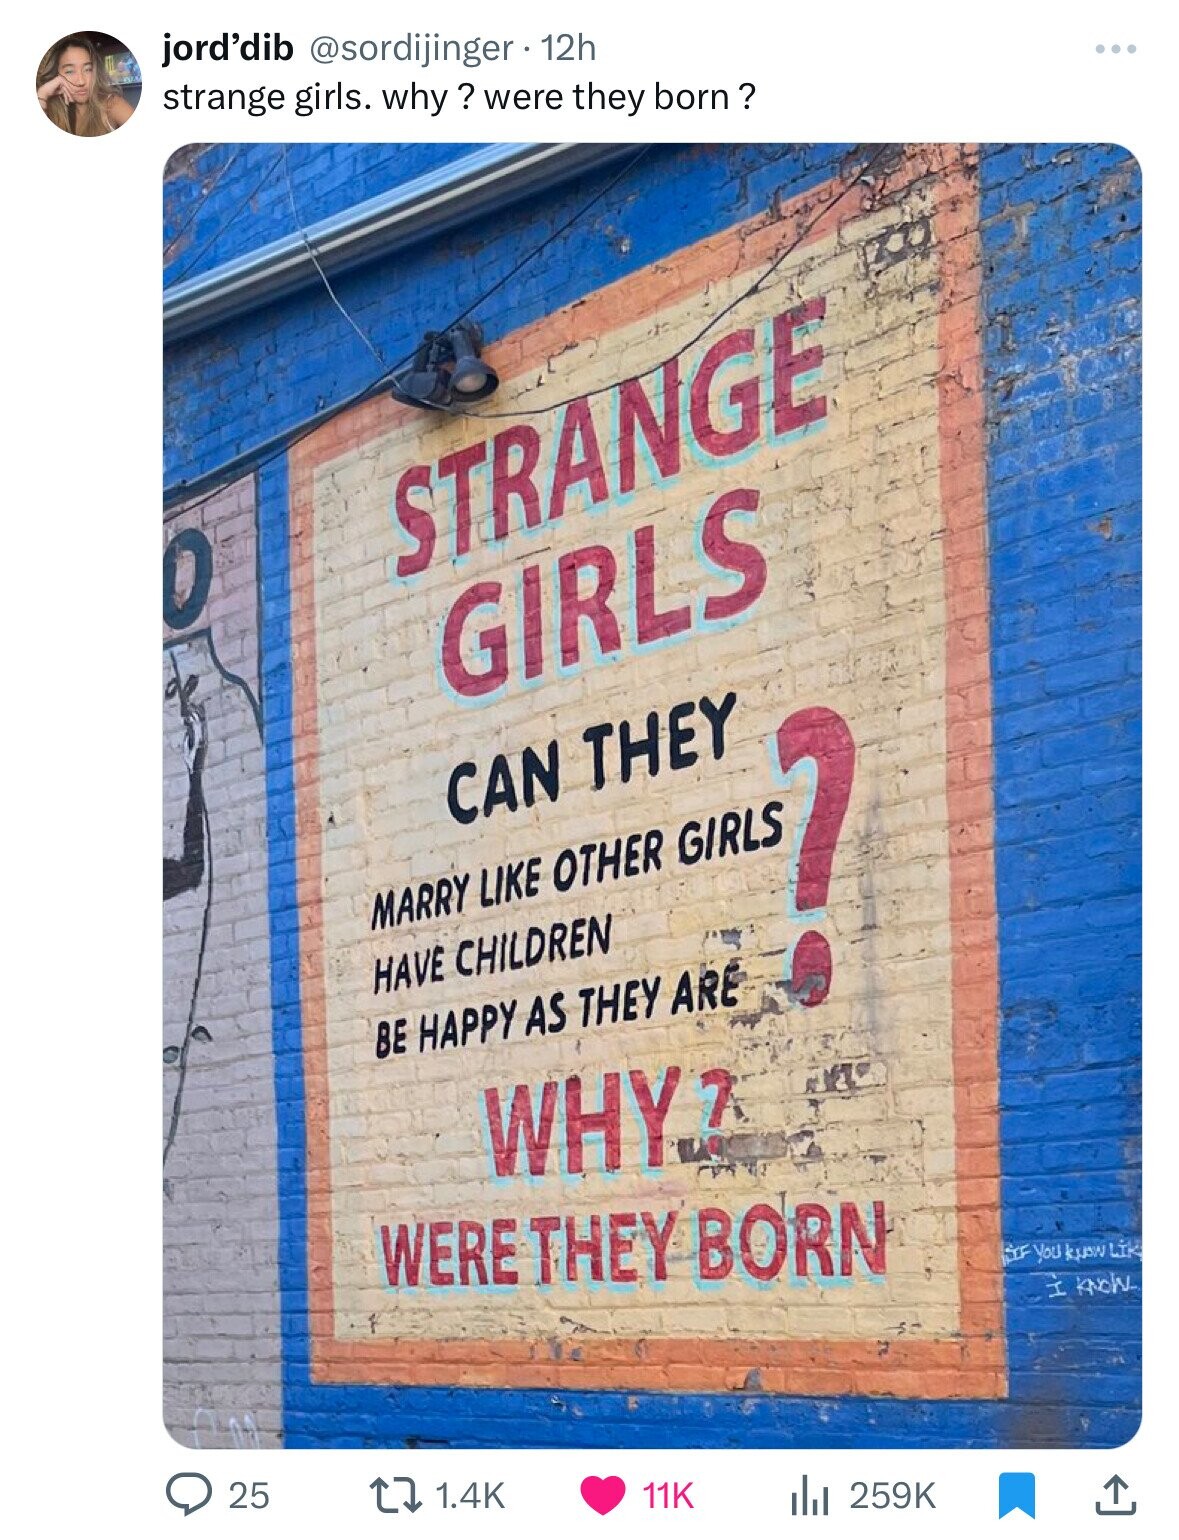 banner - jord'dib 12h strange girls. why? were they born? Strange Girls Can They Marry Other Girls Have Children Be Happy As They Are Why Were They Born I Know 25 11K lil